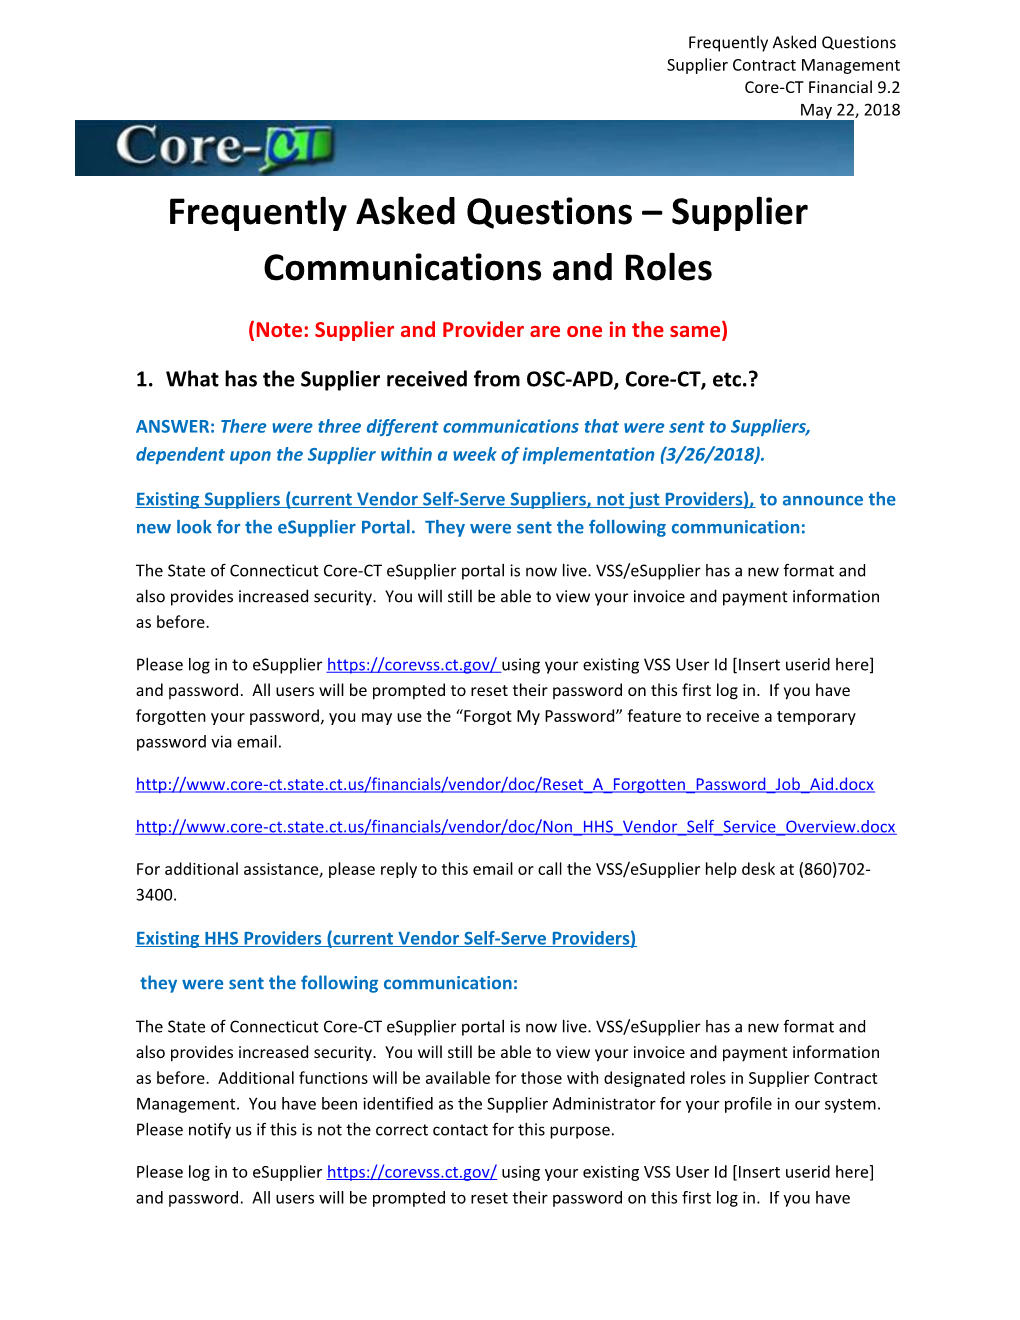 Frequently Asked Questions Supplier Communications and Roles